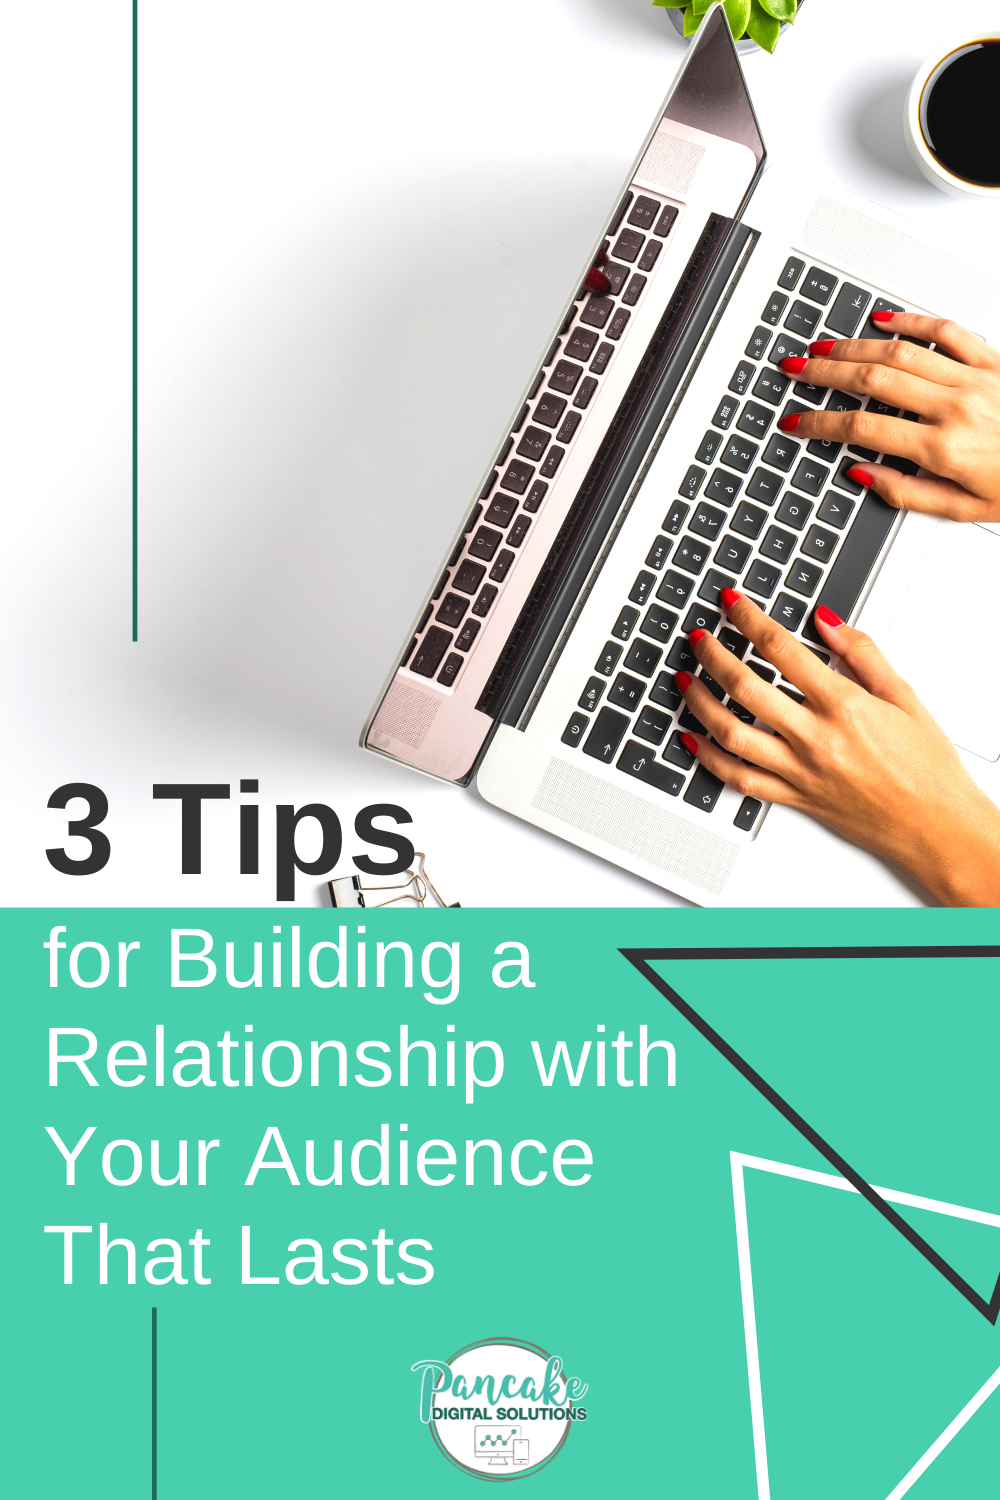 3 Tips for Building a Relationship with Your Audience that Lasts